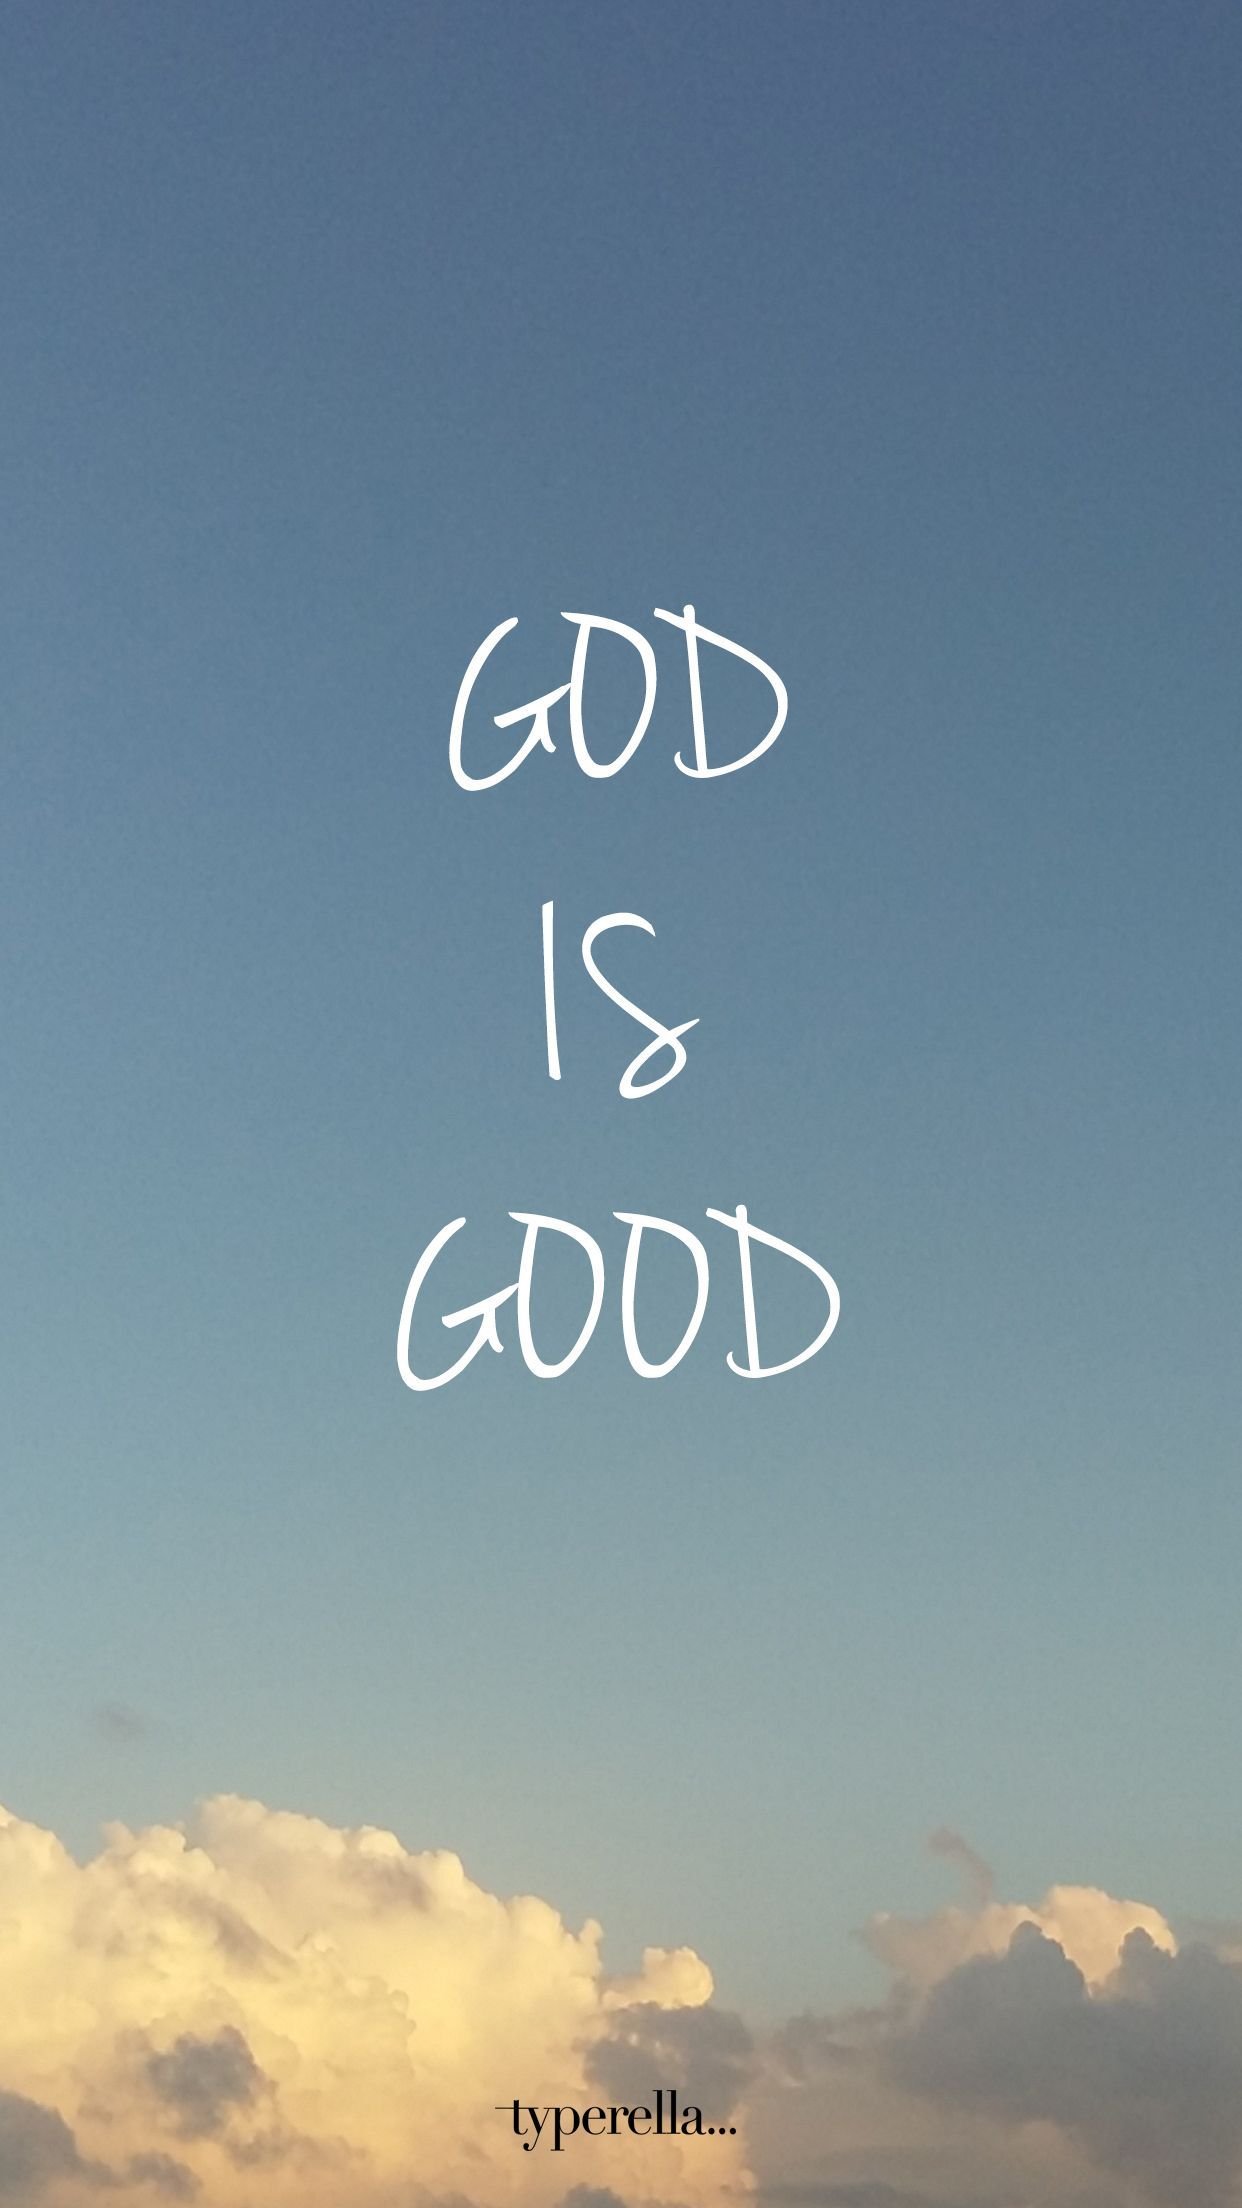 god quotes backgrounds